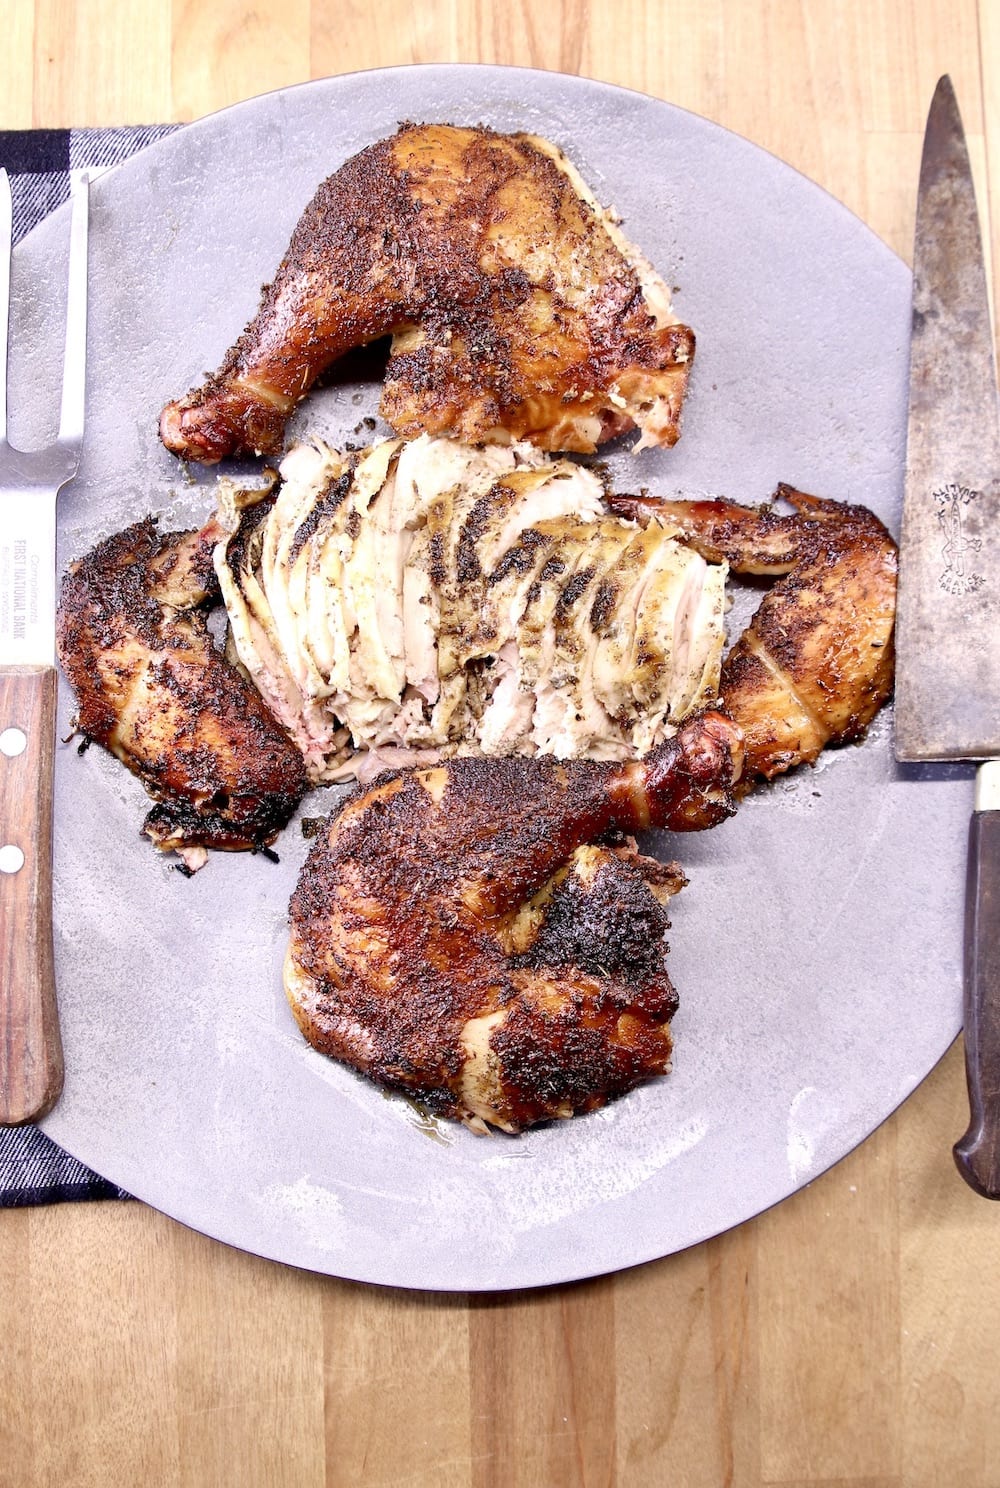 platter of smoked chicken with meat fork and knife